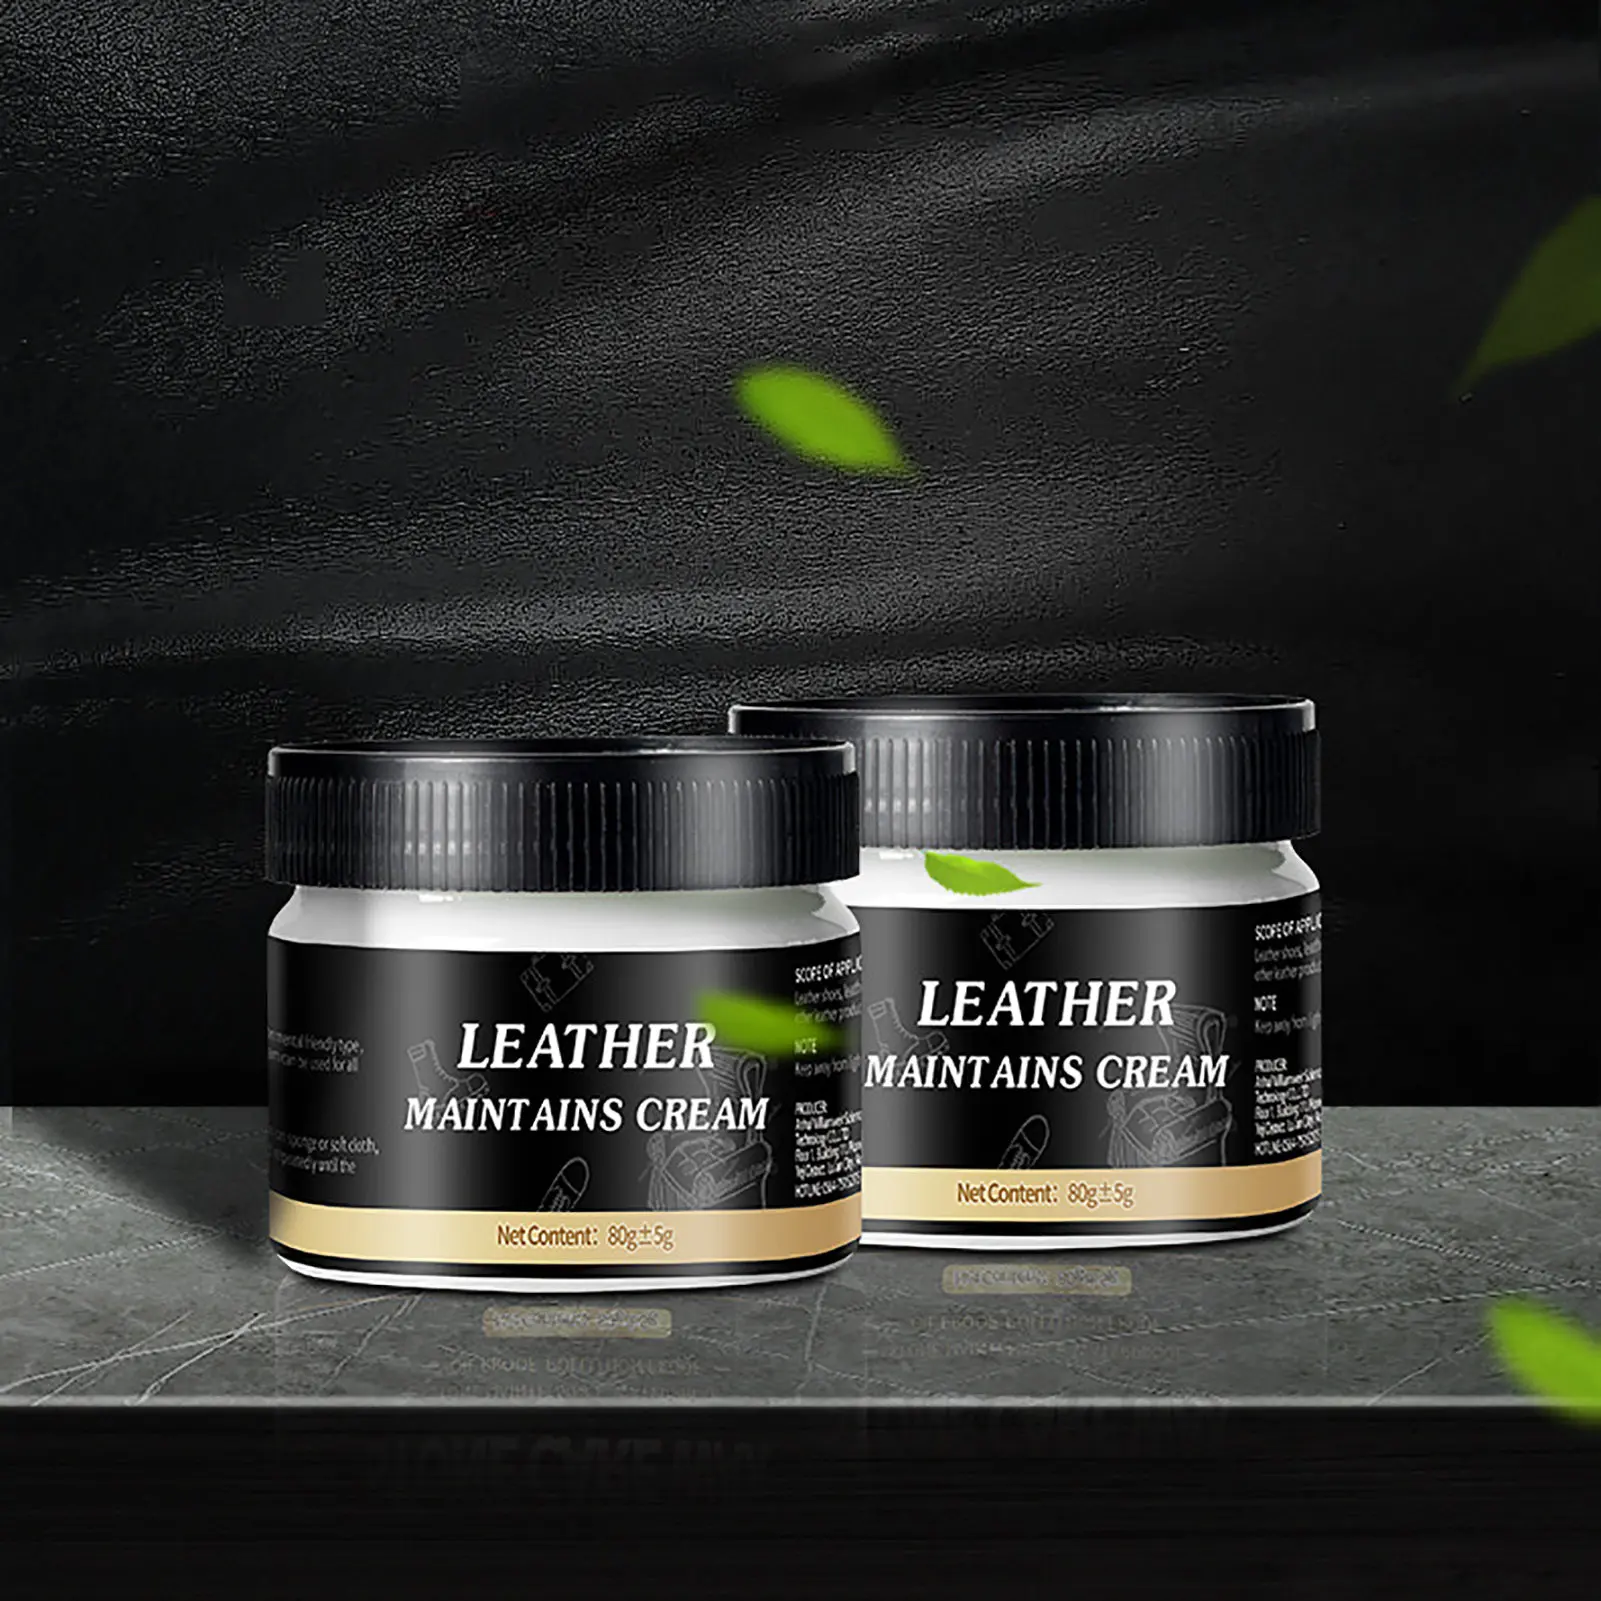 Leather Recoloring Balm - Mink Oil, Leather Repair Kit for Furniture, Black  Leather Dye for Furniture, Leather Repair Kit, Mink Oil Leather Balm,  Leather Repair - China Leather Recoloring Balm, Mink Oil